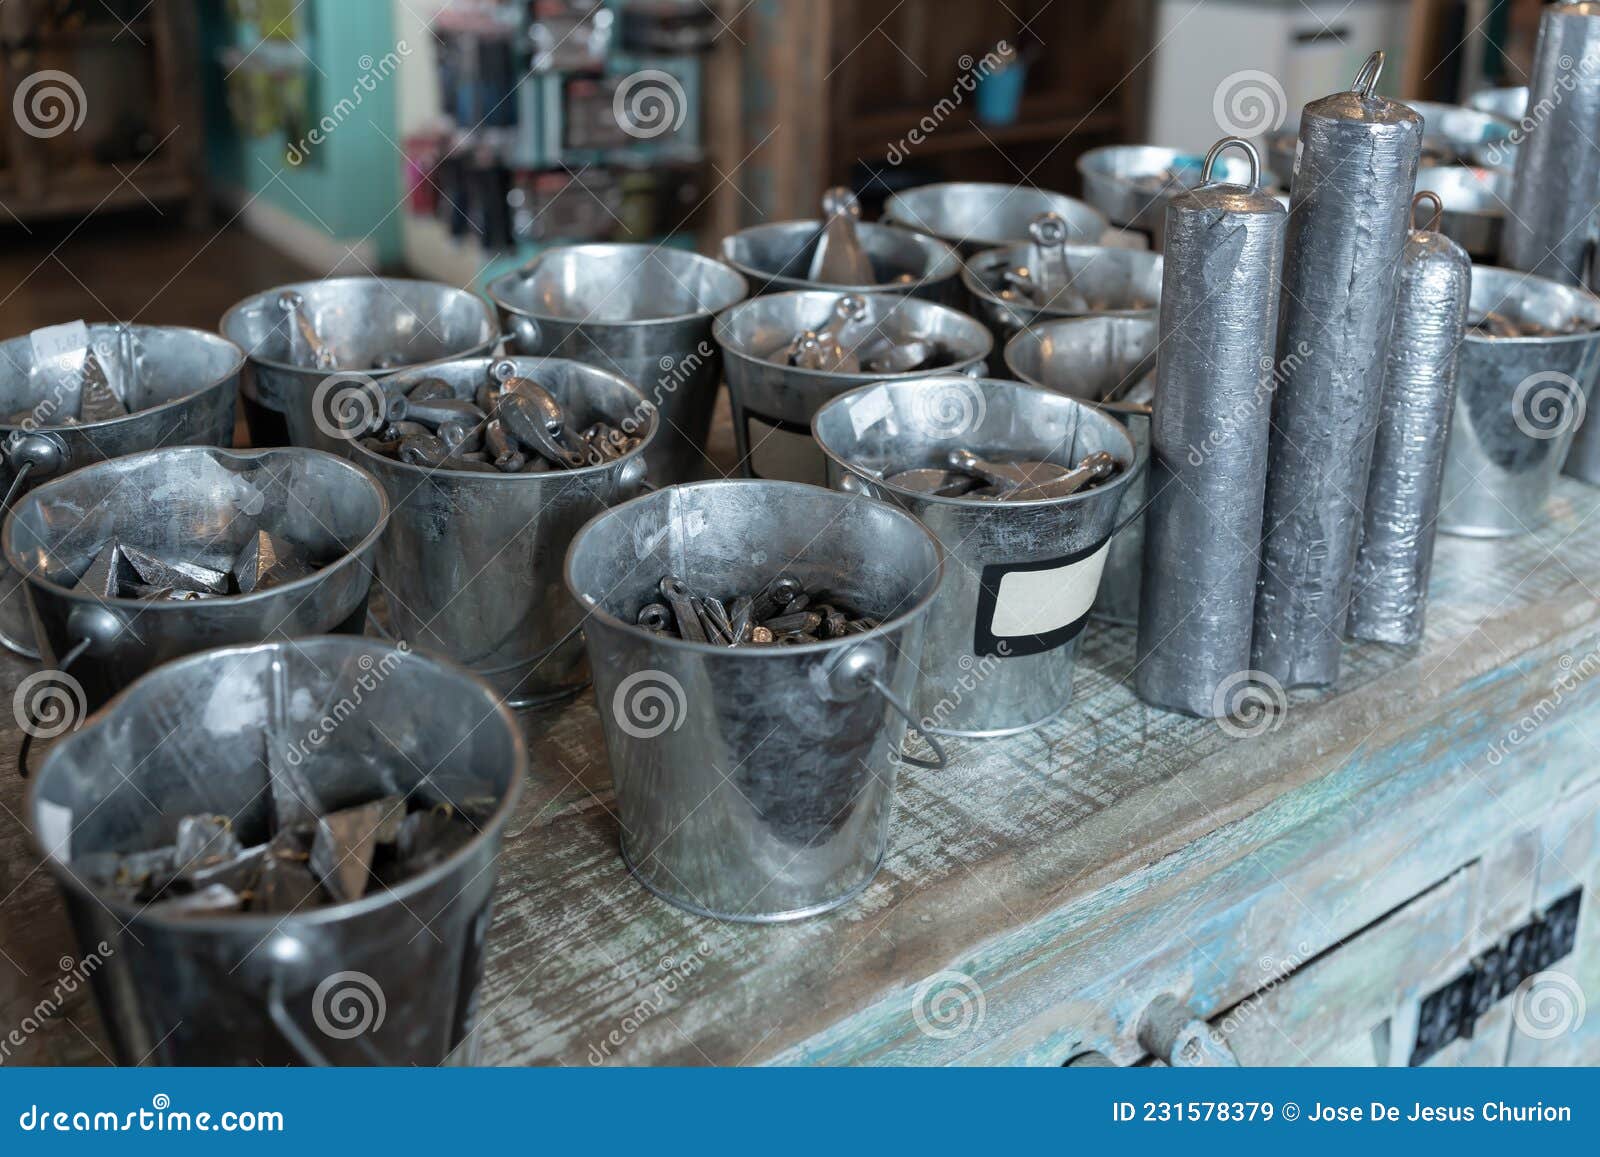 There are a Lot of Different Lead Fishing Sinkers in the Buckets. Stock  Image - Image of object, aquatic: 231578379